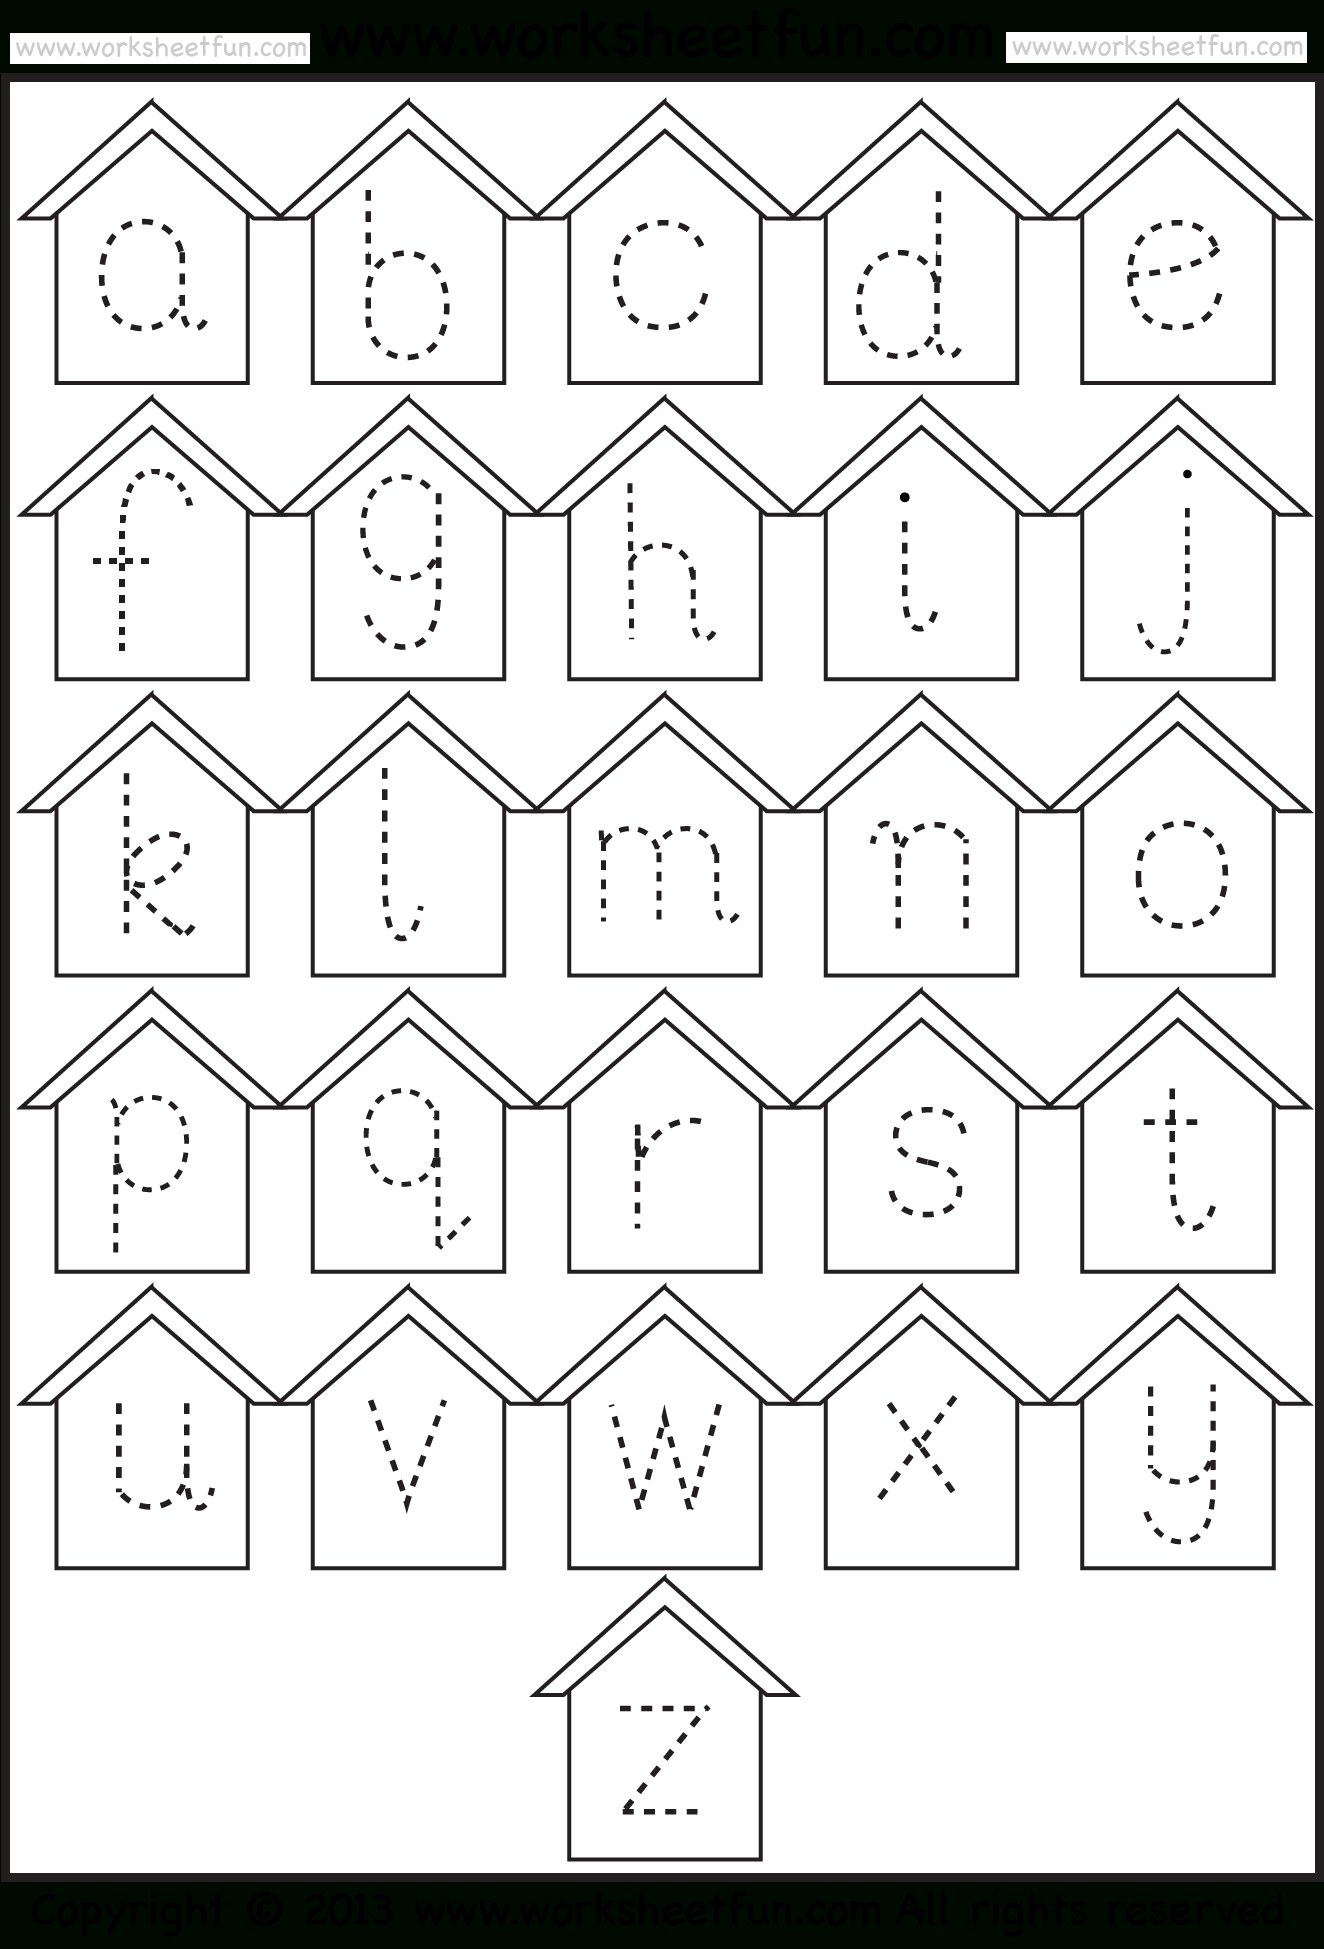 Free Tracing Letters Worksheet | Printable Worksheets And with regard to Tracing Small Letters Of The Alphabet